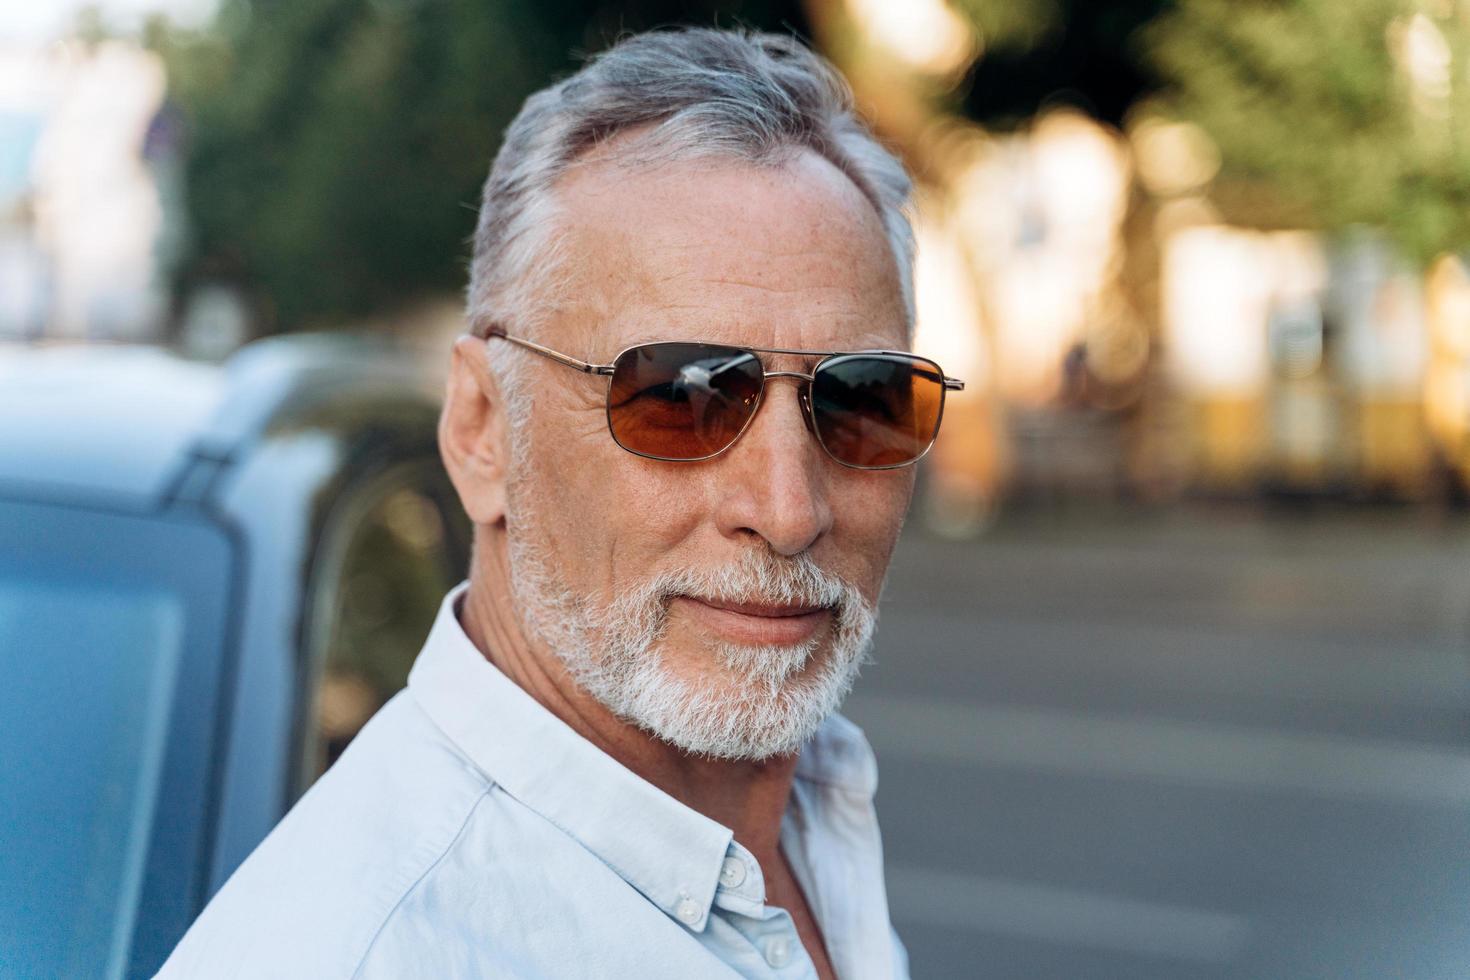 Portrait of senior man outdoors in a shirt and sunglasses photo